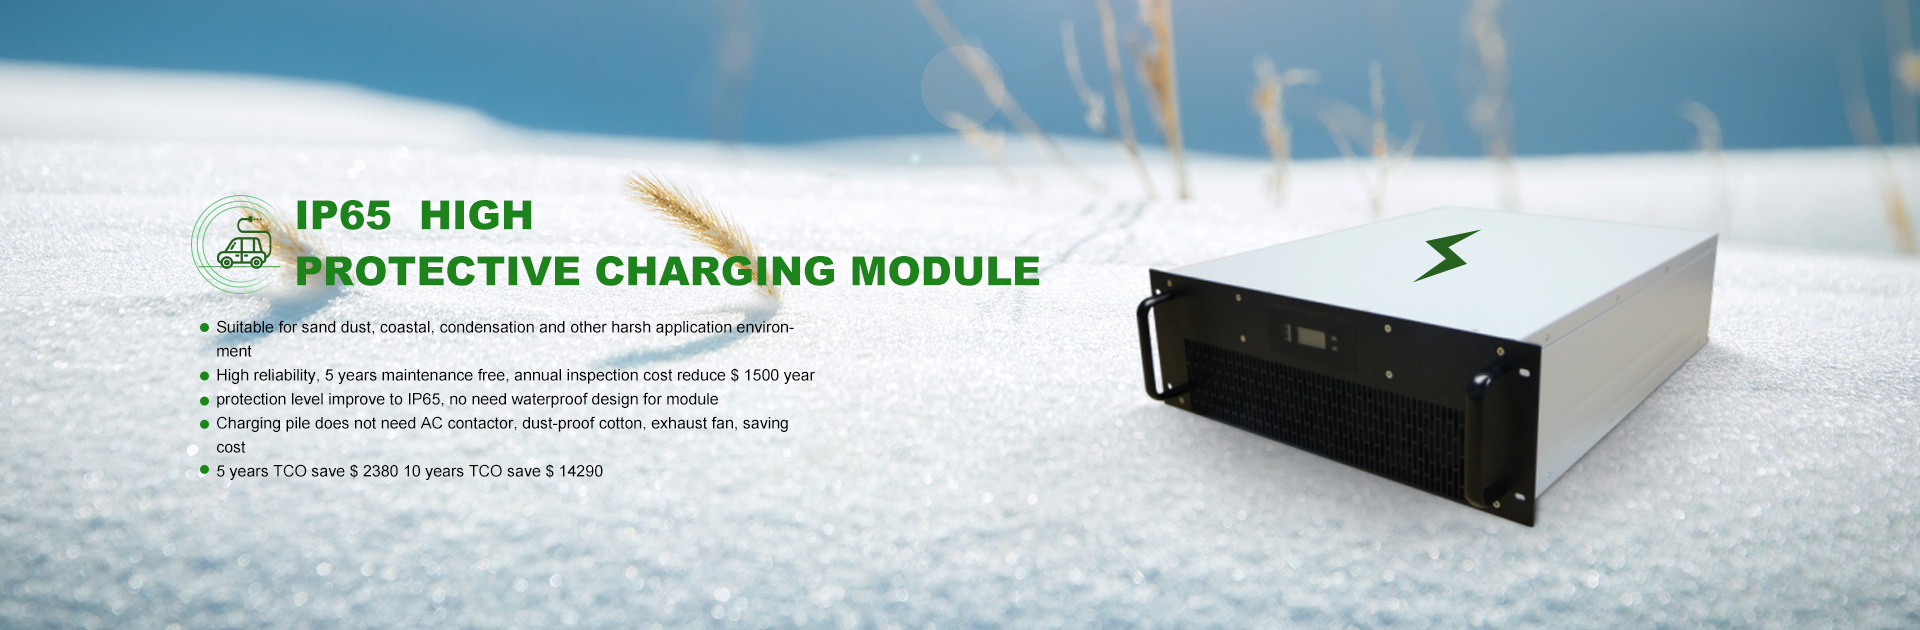 ip65-high-protective-charging-module-product